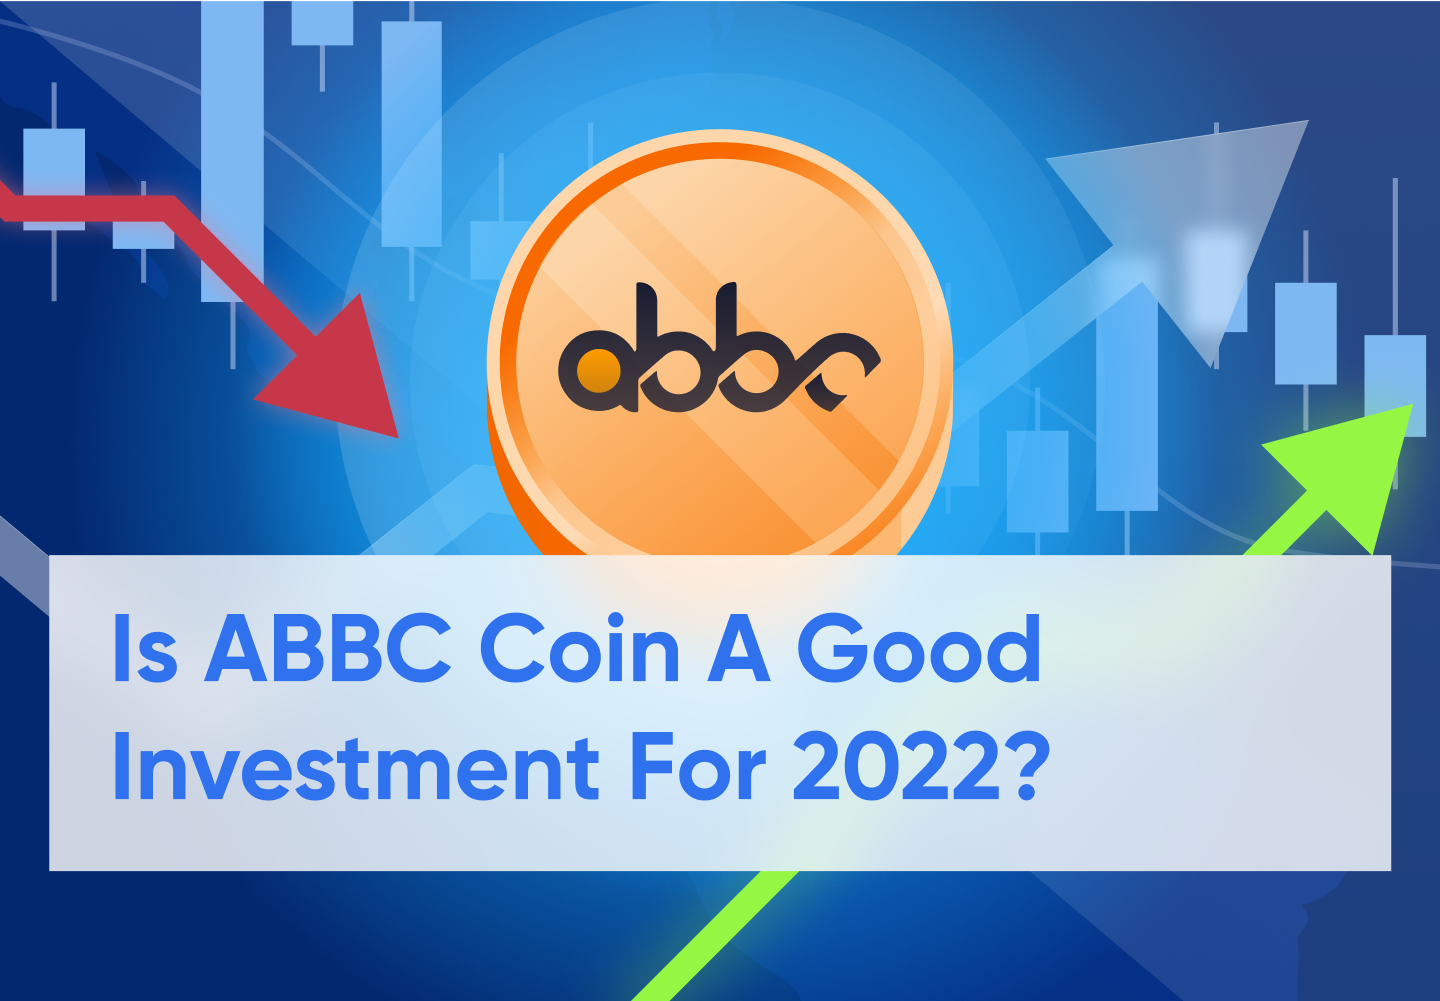 ABBC Coin Long-Term Price Predictions From 2022 -2030